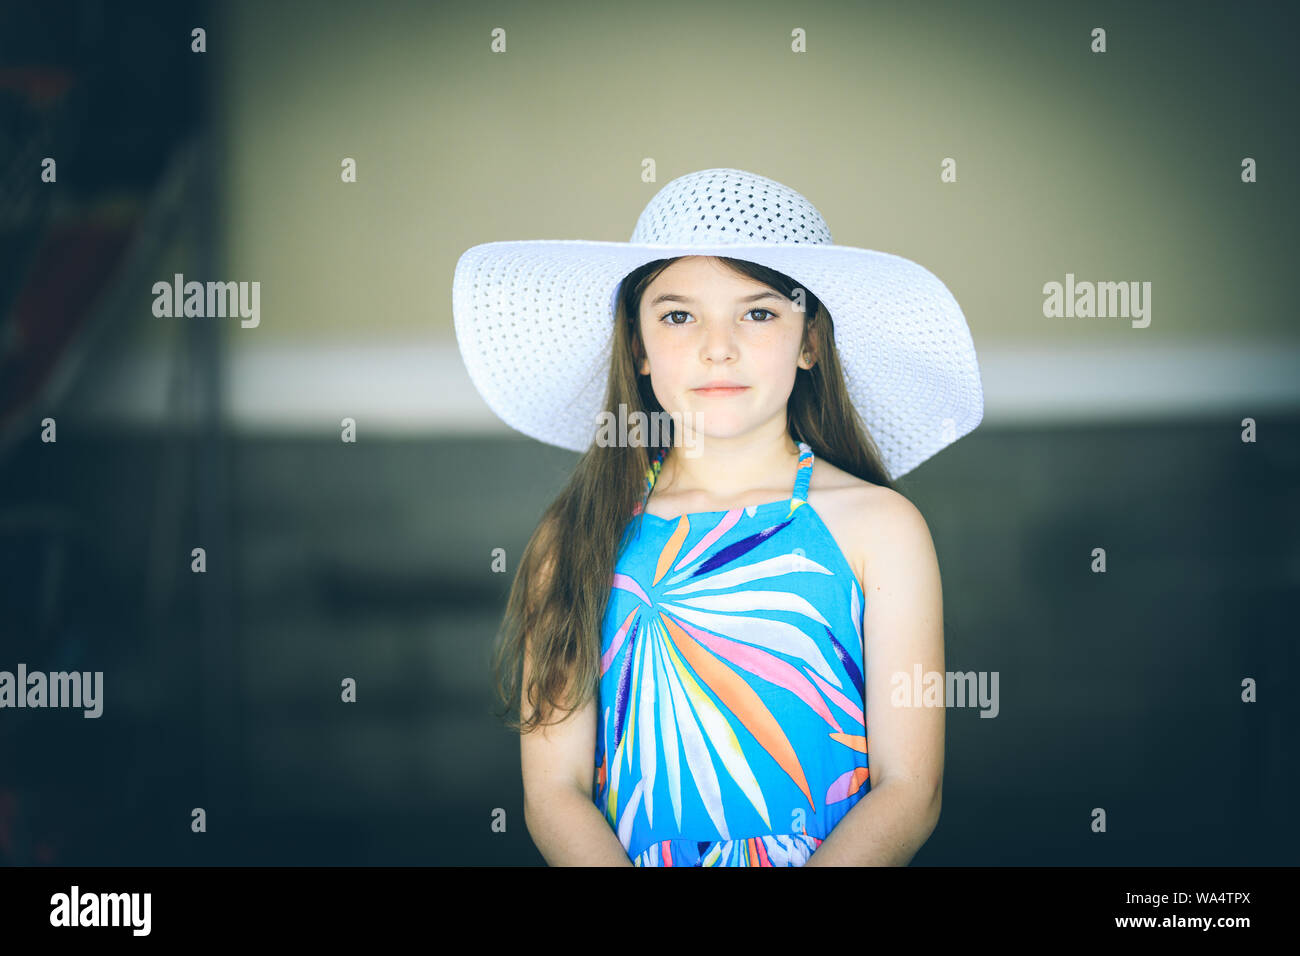 Little girl in dress and big white hat Stock Photo